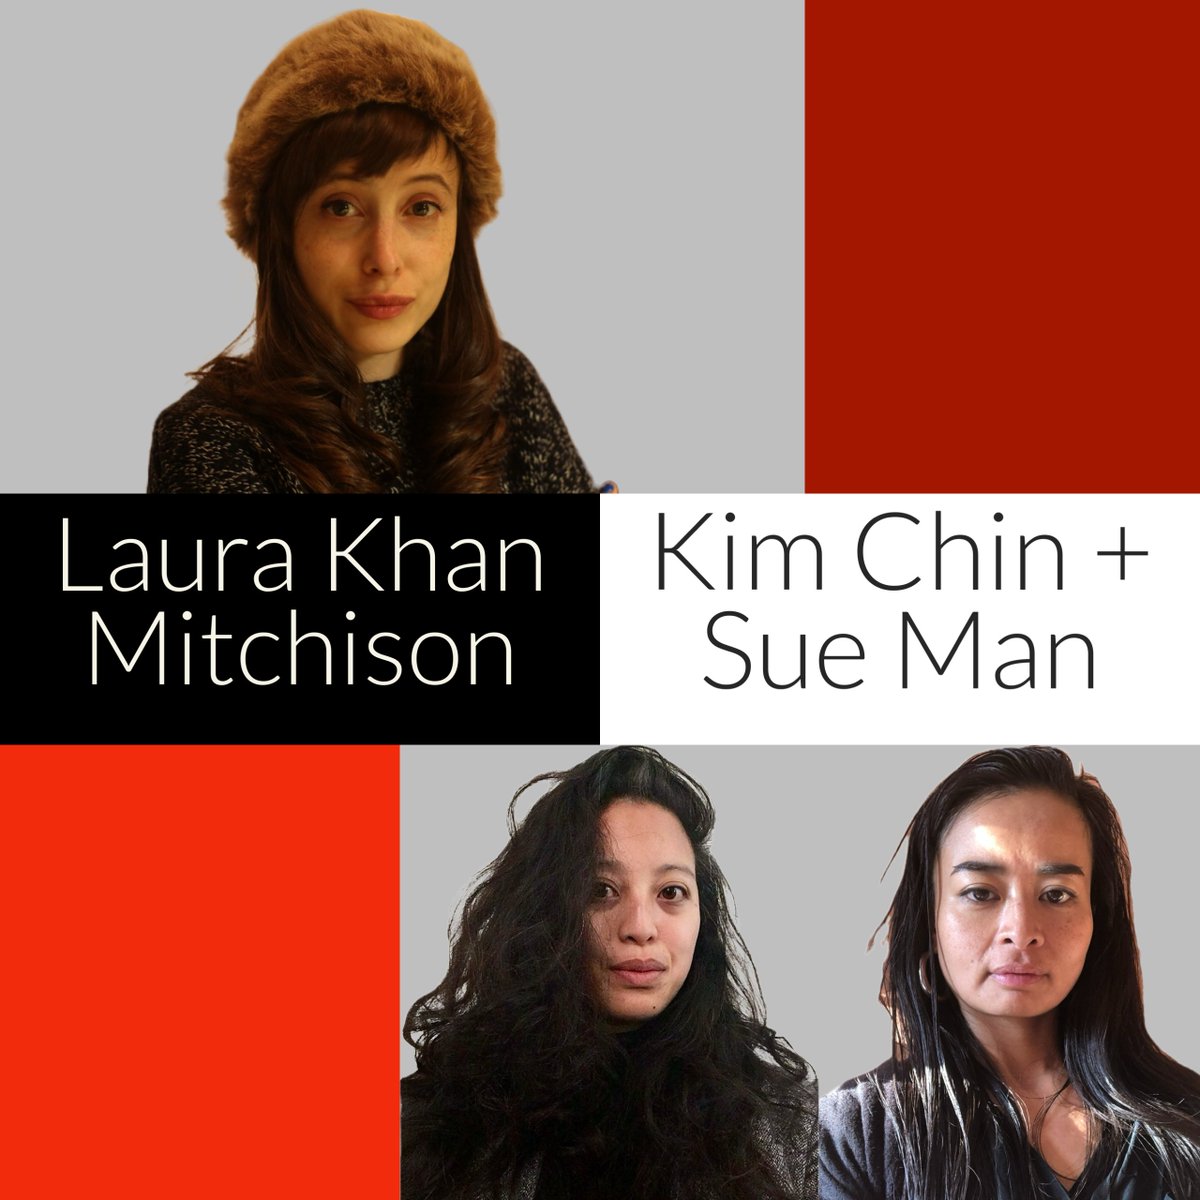 Meet our Creative Lab facilitators for Workshop 6: Sound Stitching - Textiles Sketching & Acts of Listening Sun10th March 2-4:30pm @richmixlondon. Laura Mitchison @ontherecordcic Kim Chin & Sue Man from ESEA Unseen To join get your all-access pass for £10 only. 🎟️🔗 in bio.